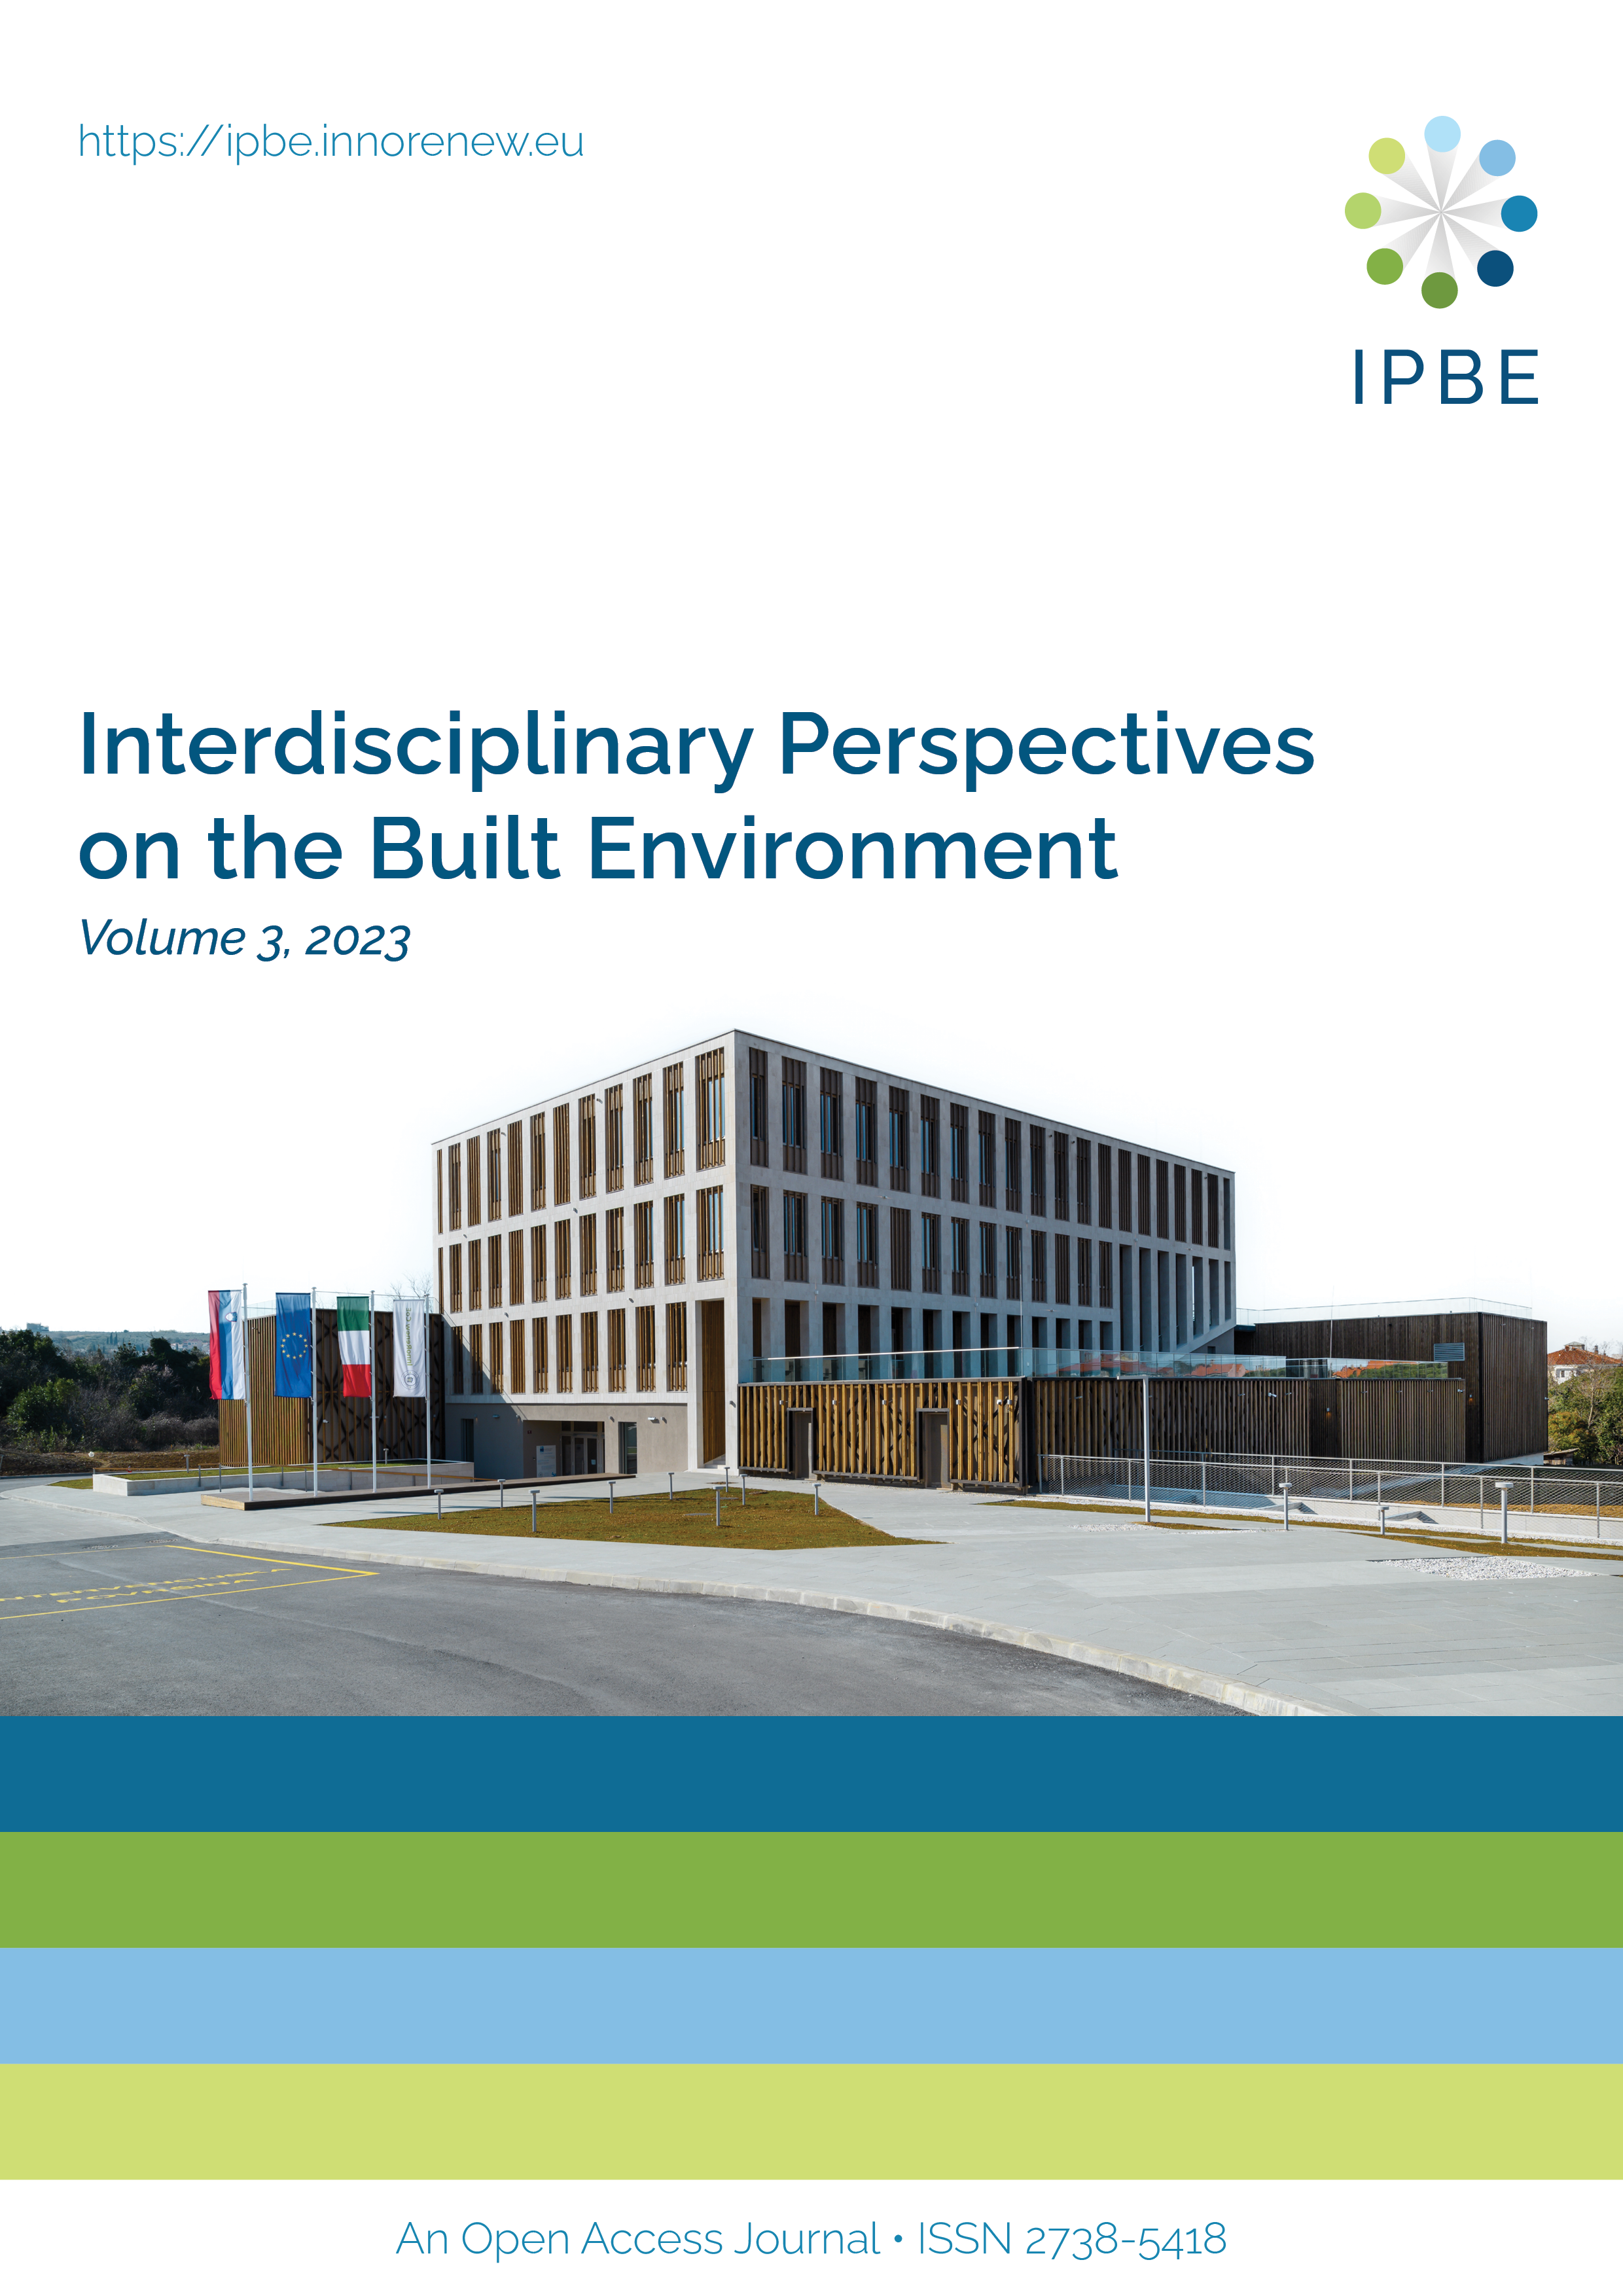 IPBE issue cover of volume 3, featuring a photo of the InnoRenew CoE building on a white background. There are four coloured stripes below the photo alternating between blue and green.